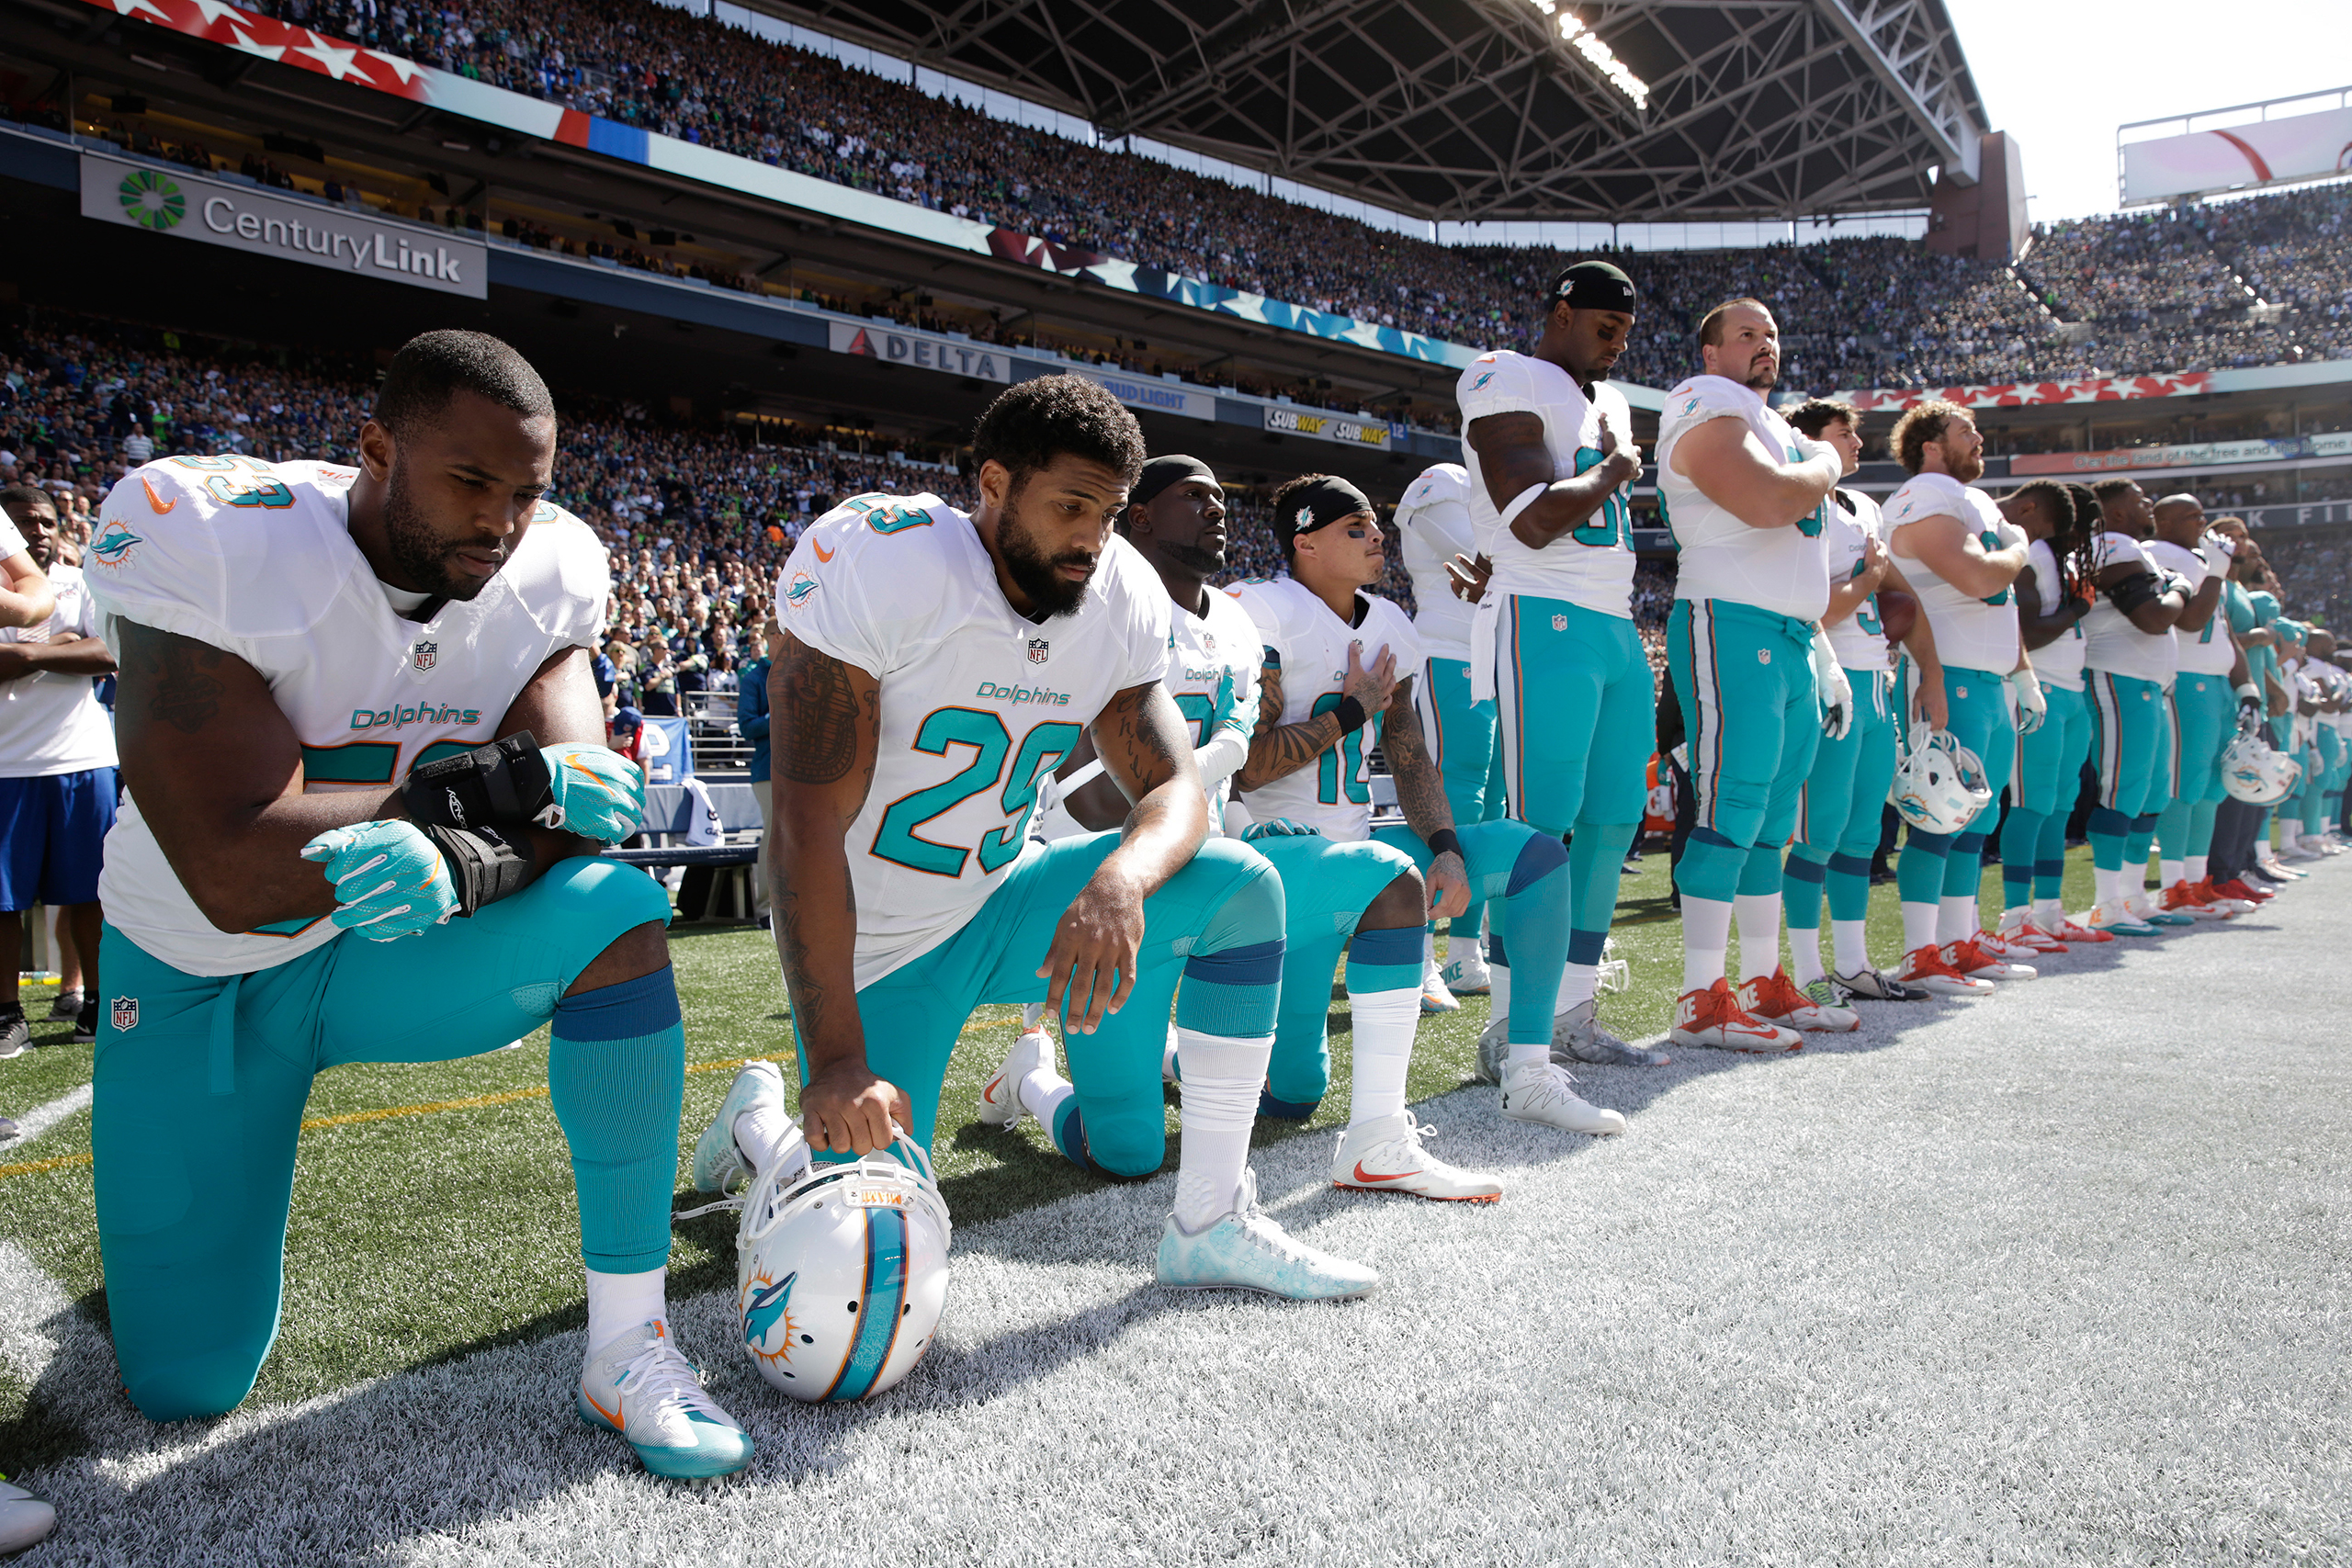 Jelani Jenkins, Arian Foster, Michael Thomas, and Kenny Stills of the Miami Dolphins kneel during the singing of the national anthem before a game against the Seattle Seahawks in Seattle on Sept. 11, 2016. (Stephen Brashear—AP)